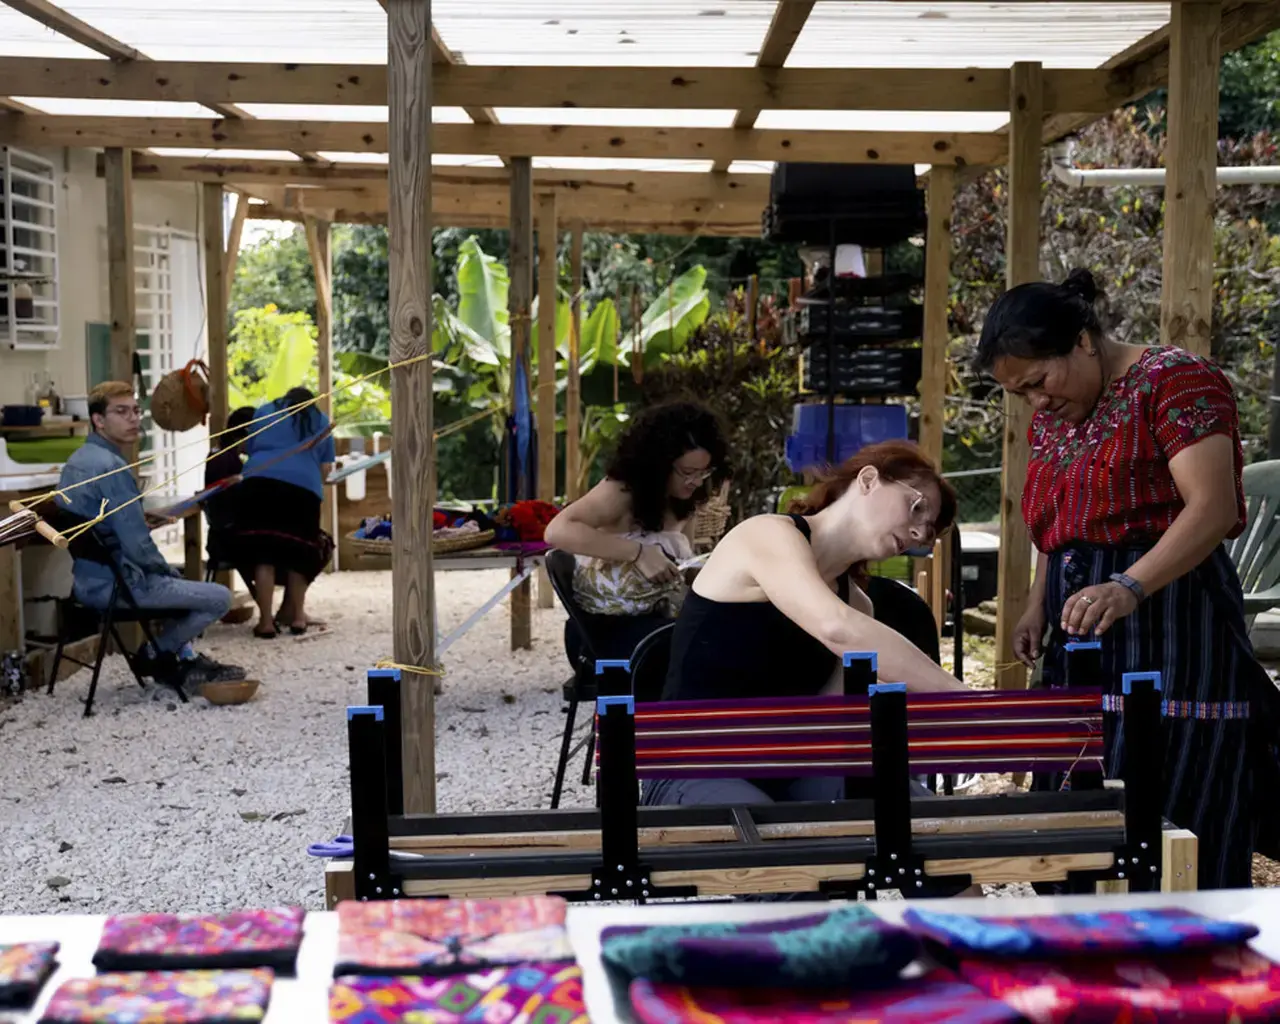 A loom weaving workshop hosted by textile collectives Trama Antillana and Trama Textiles in Aibonito, Puerto Rico.